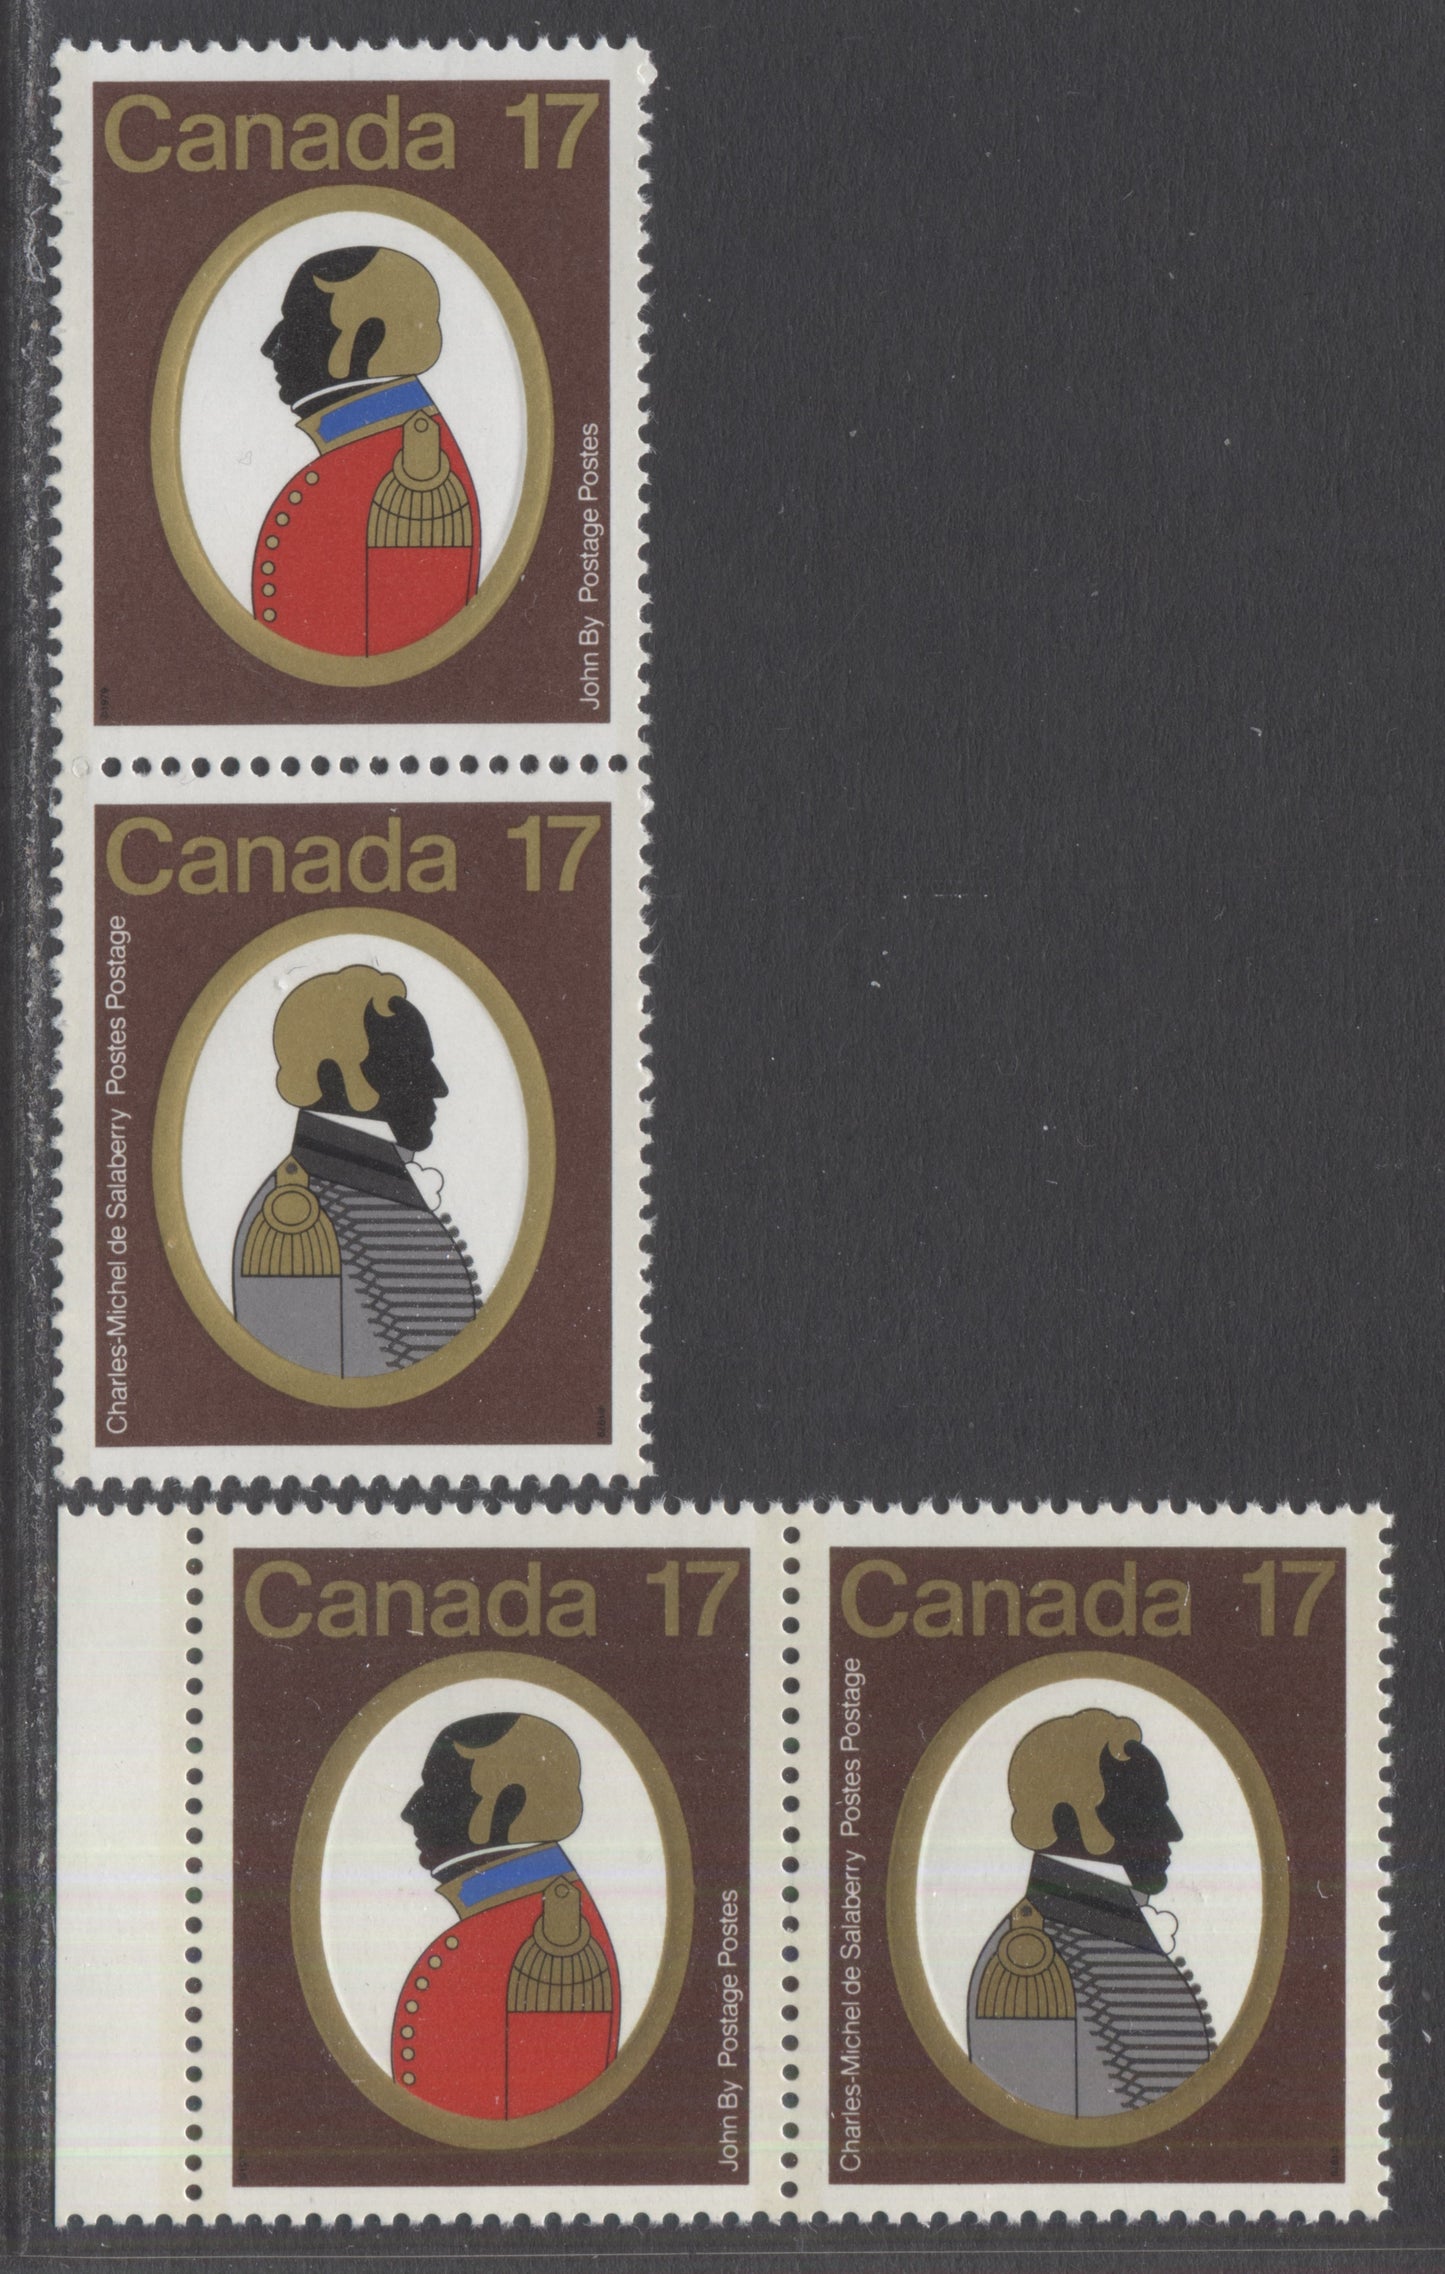 Lot 451 Canada #820avar 17c Multicolored Colonel C.M de Salaberry & Colonel John By, 1979 Canadian Colonels Issue, 2 VFNH Pairs With Yellow Gold & Gold Shifted To The Right Slightly, Not Aligning With Embossing, Normal Pair To Compare